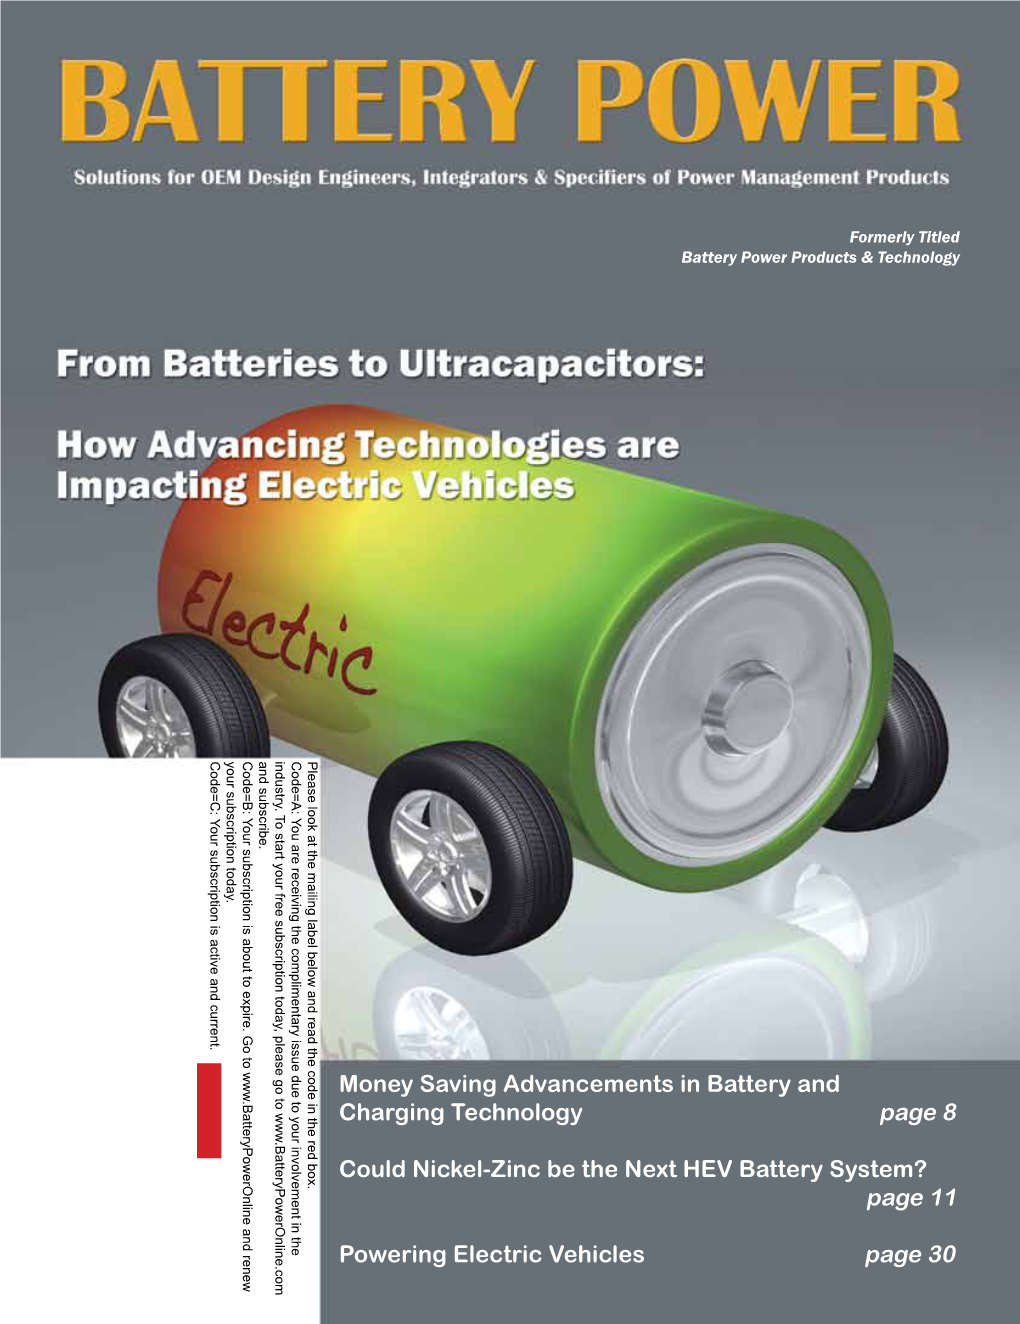 Money Saving Advancements in Battery and Charging Technology Page 8 Could Nickel-Zinc Be the Next HEV Battery System?